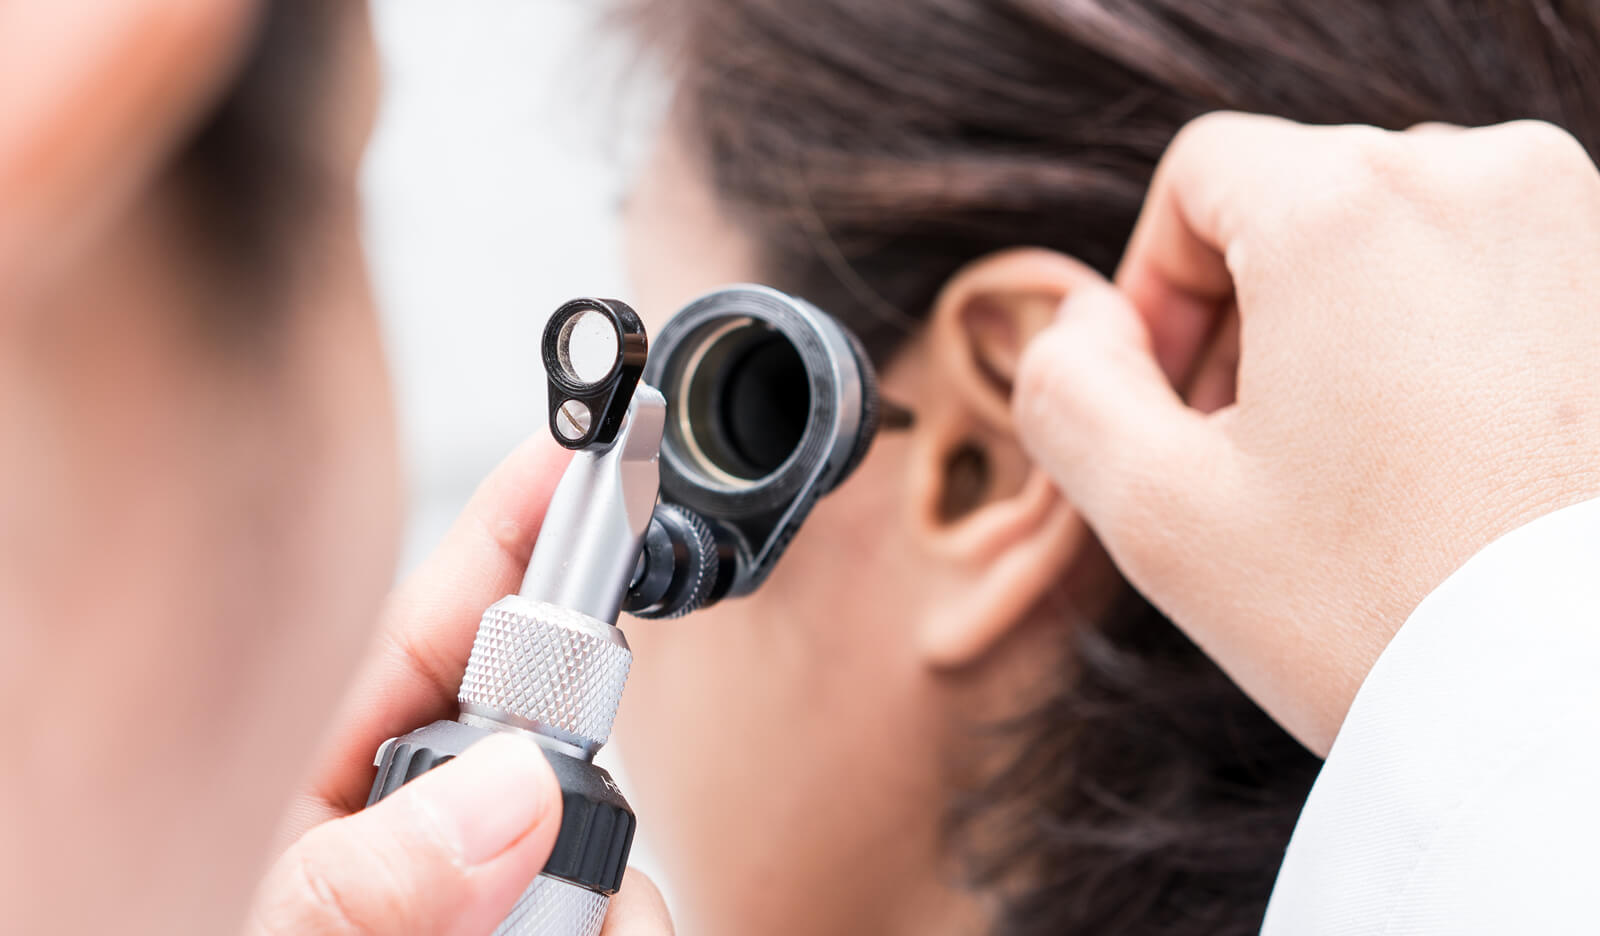 A doctor examines patient with an inner ear disorder